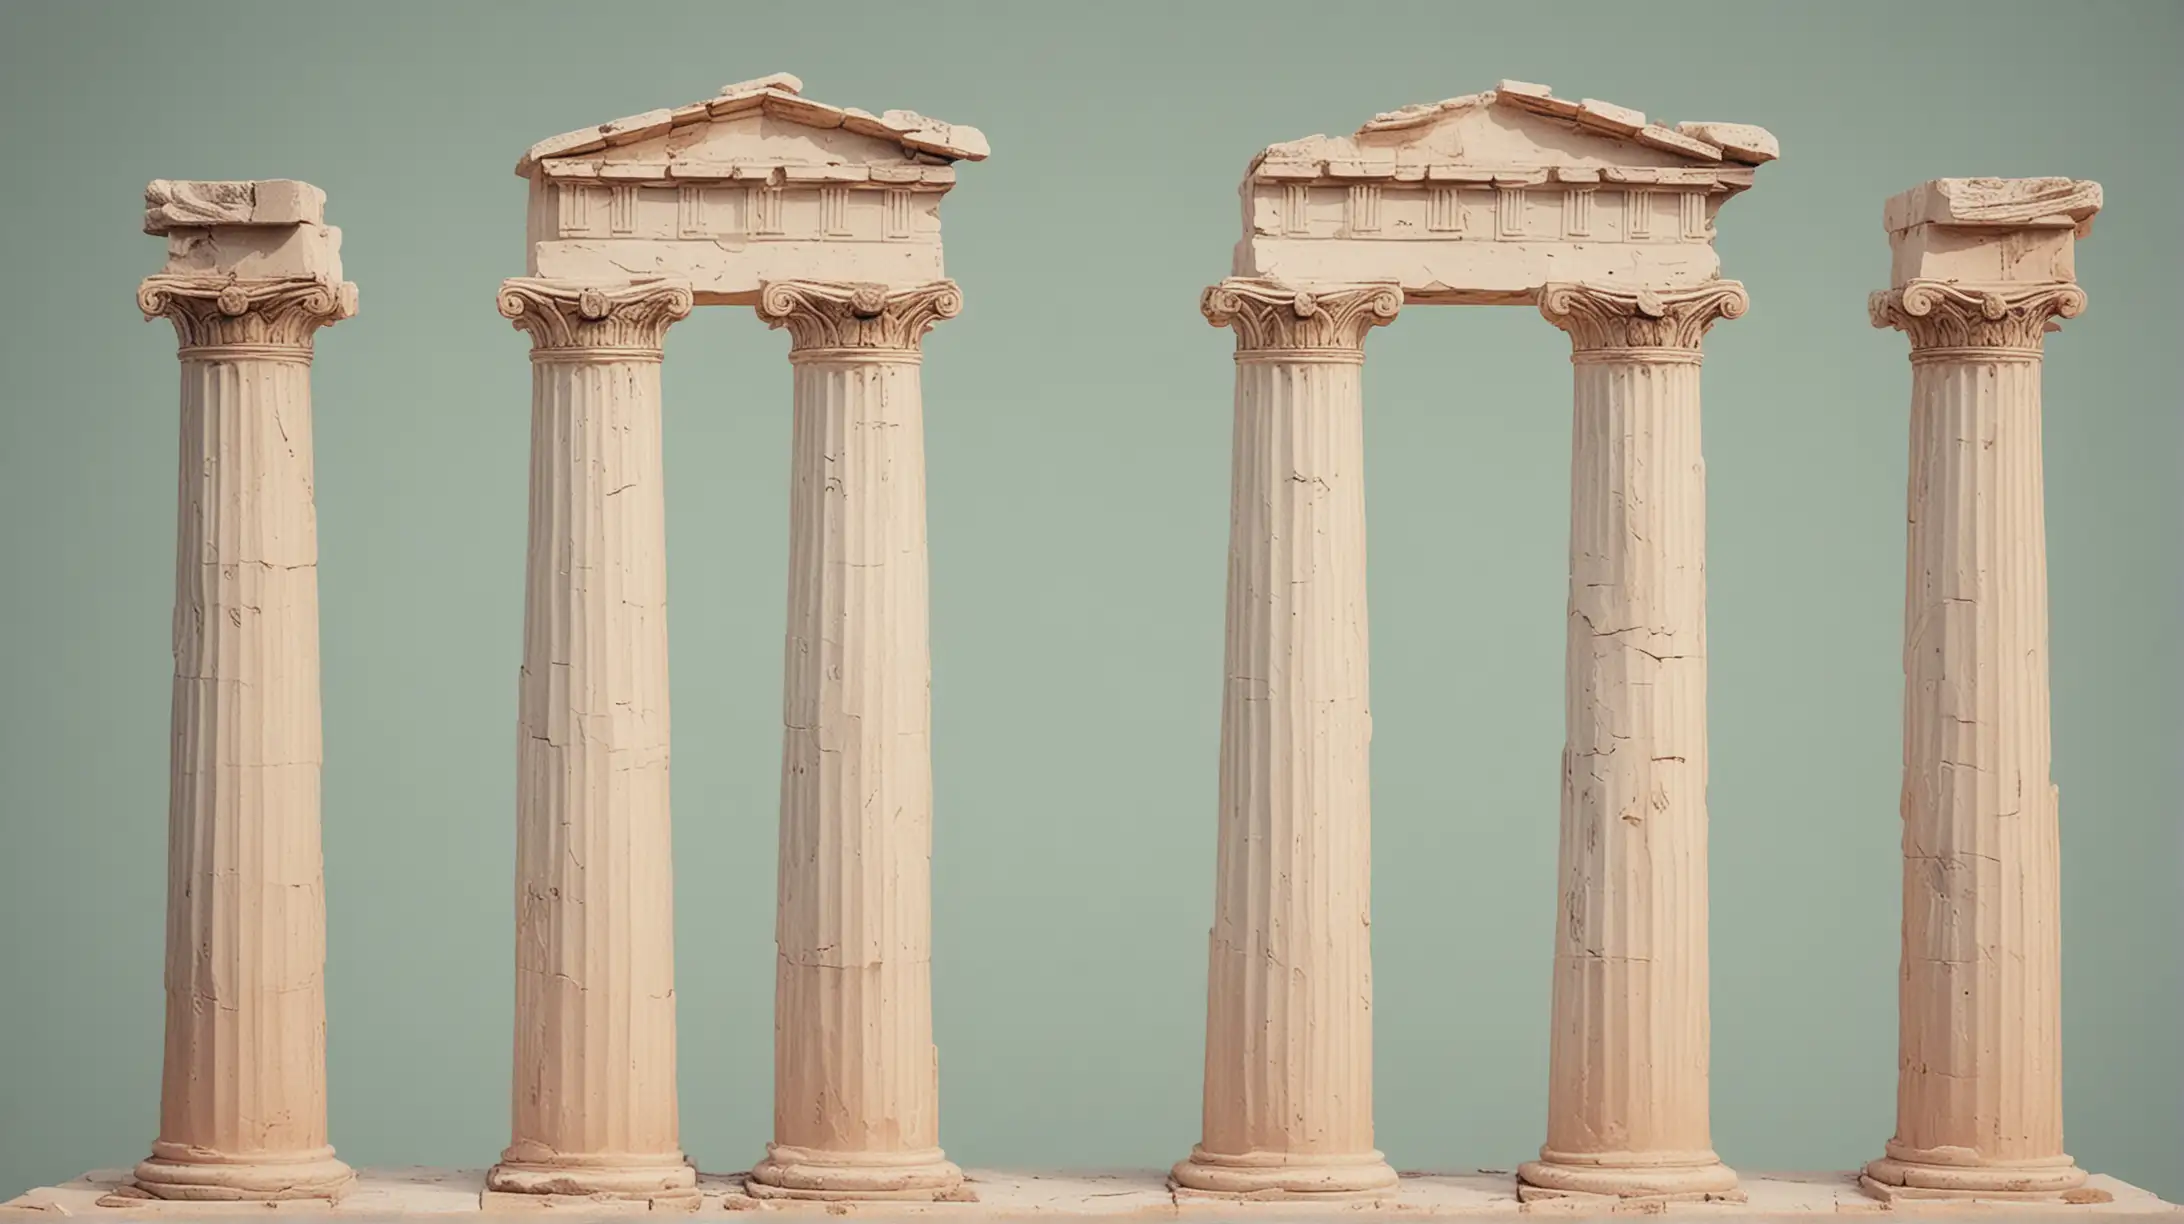 generate 4 greek pillars with a pastel color background